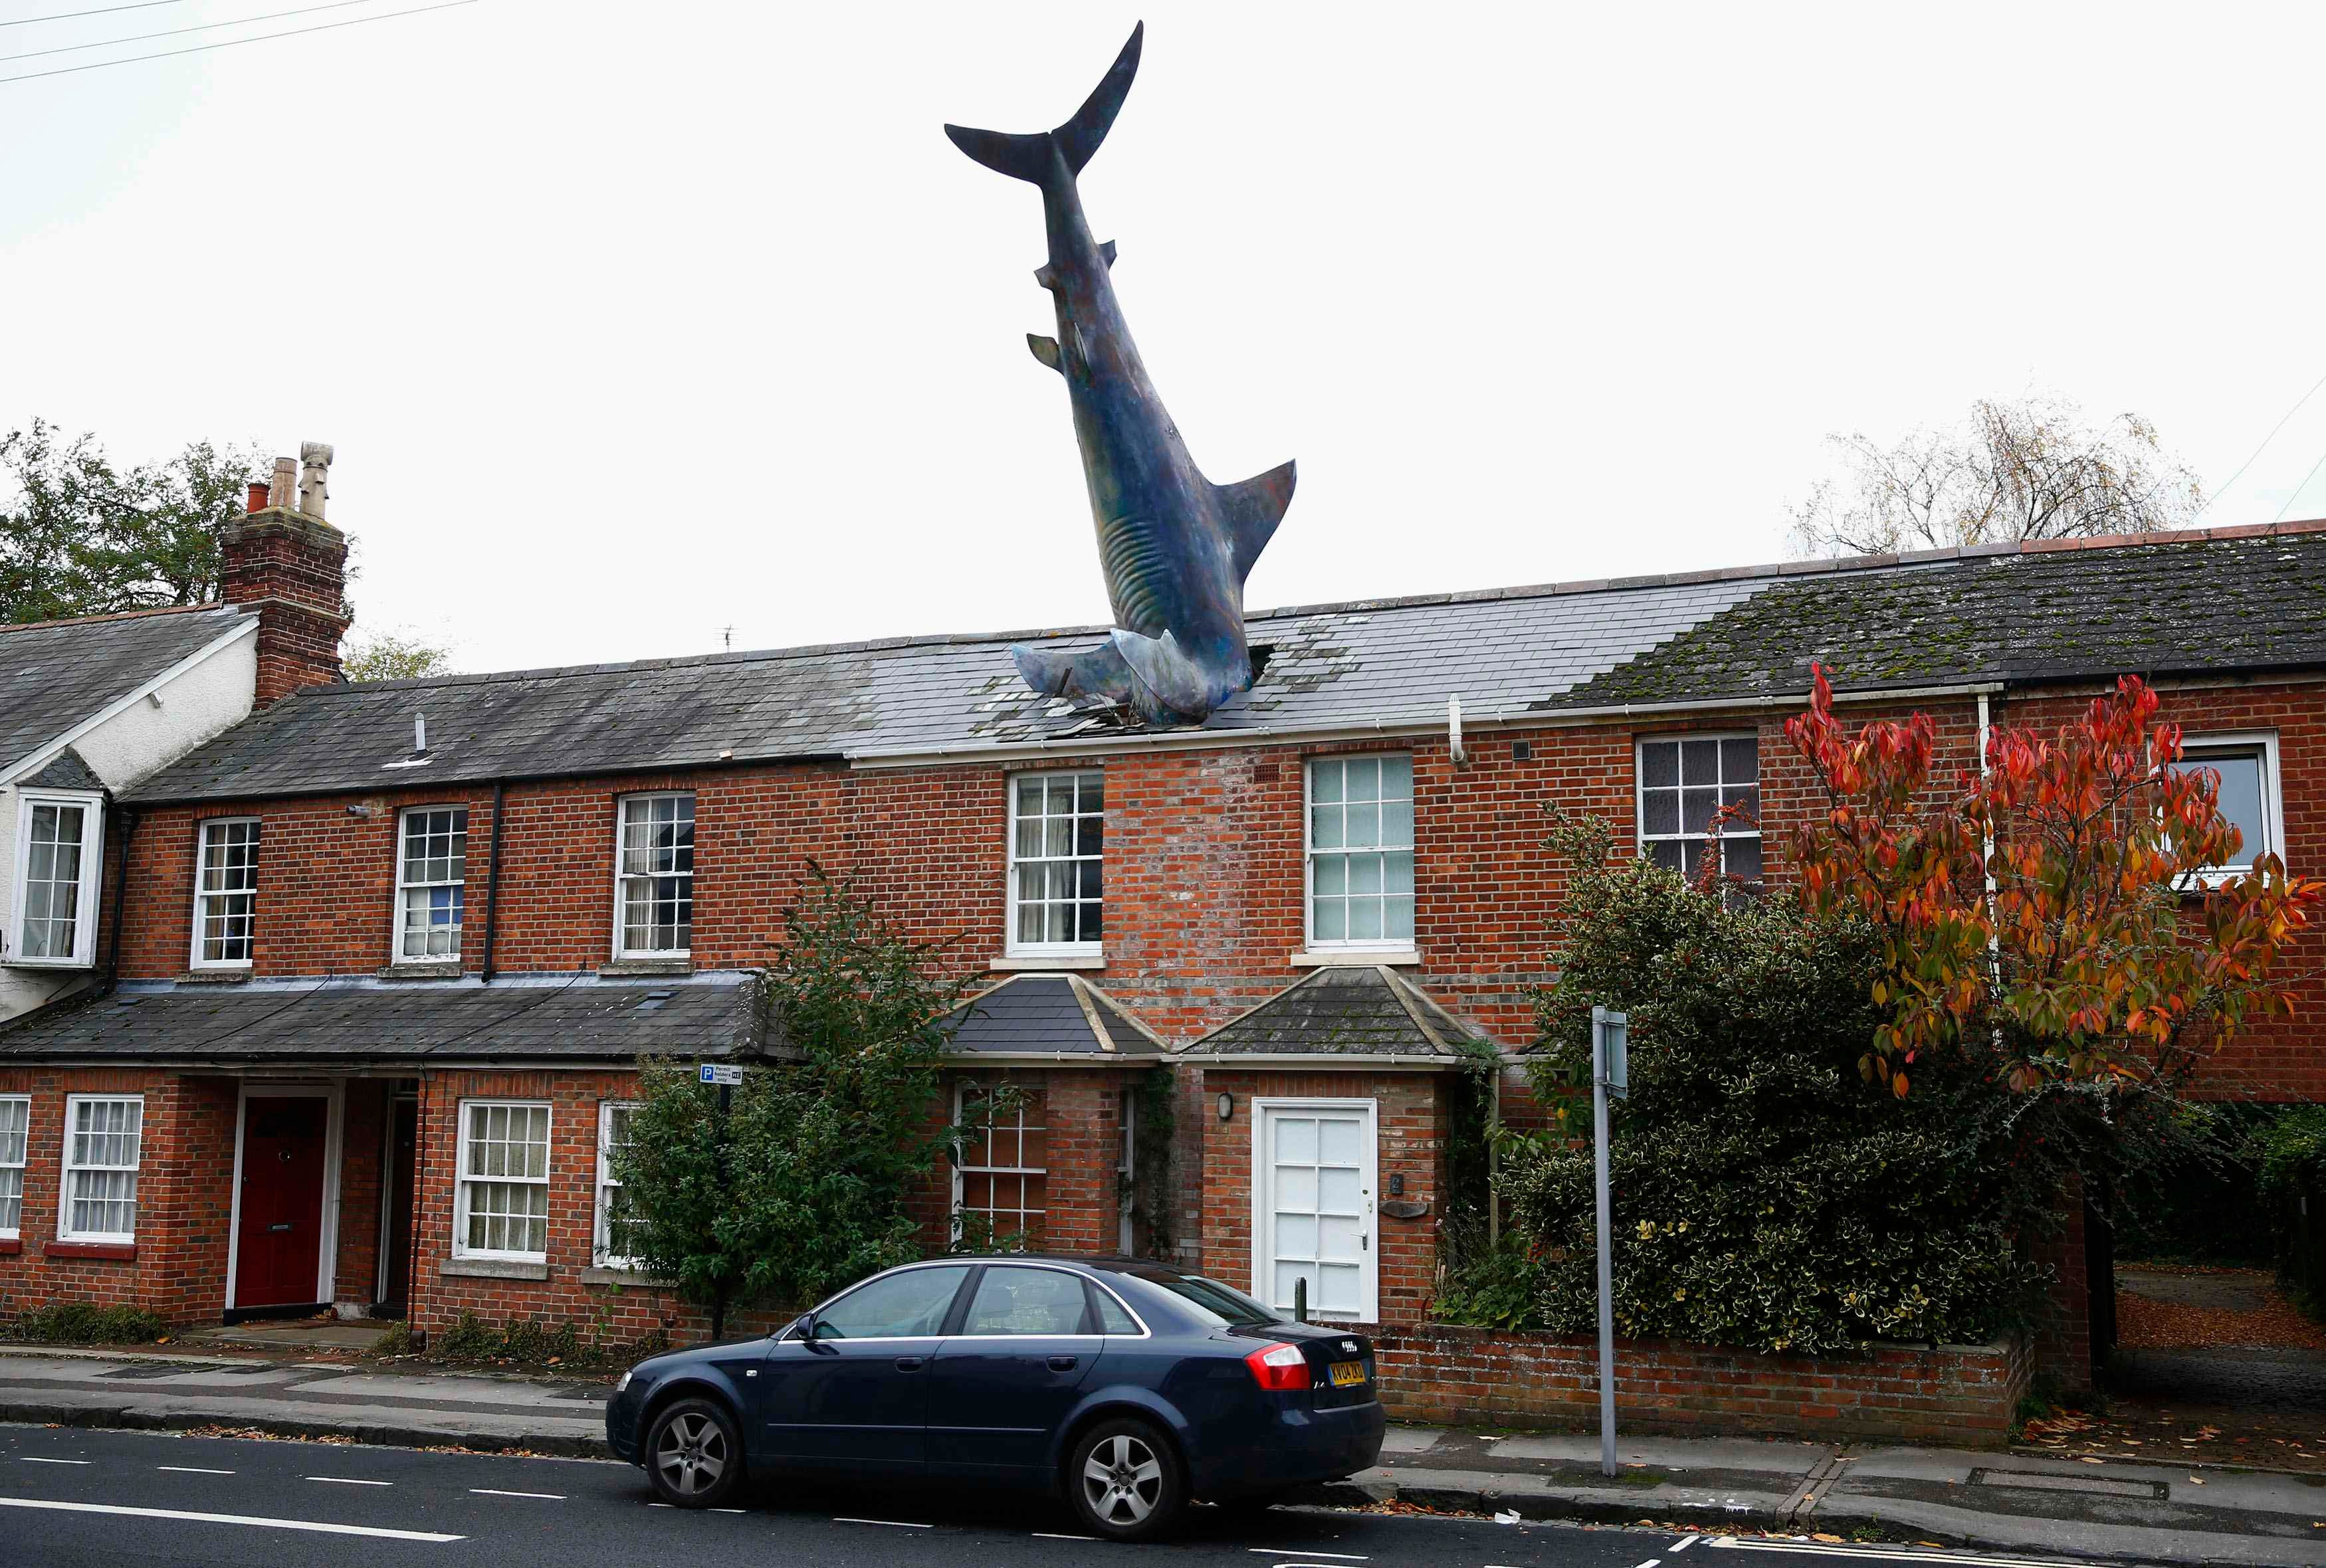 The shark was created by sculptor John Buckley and is made from fibreglass